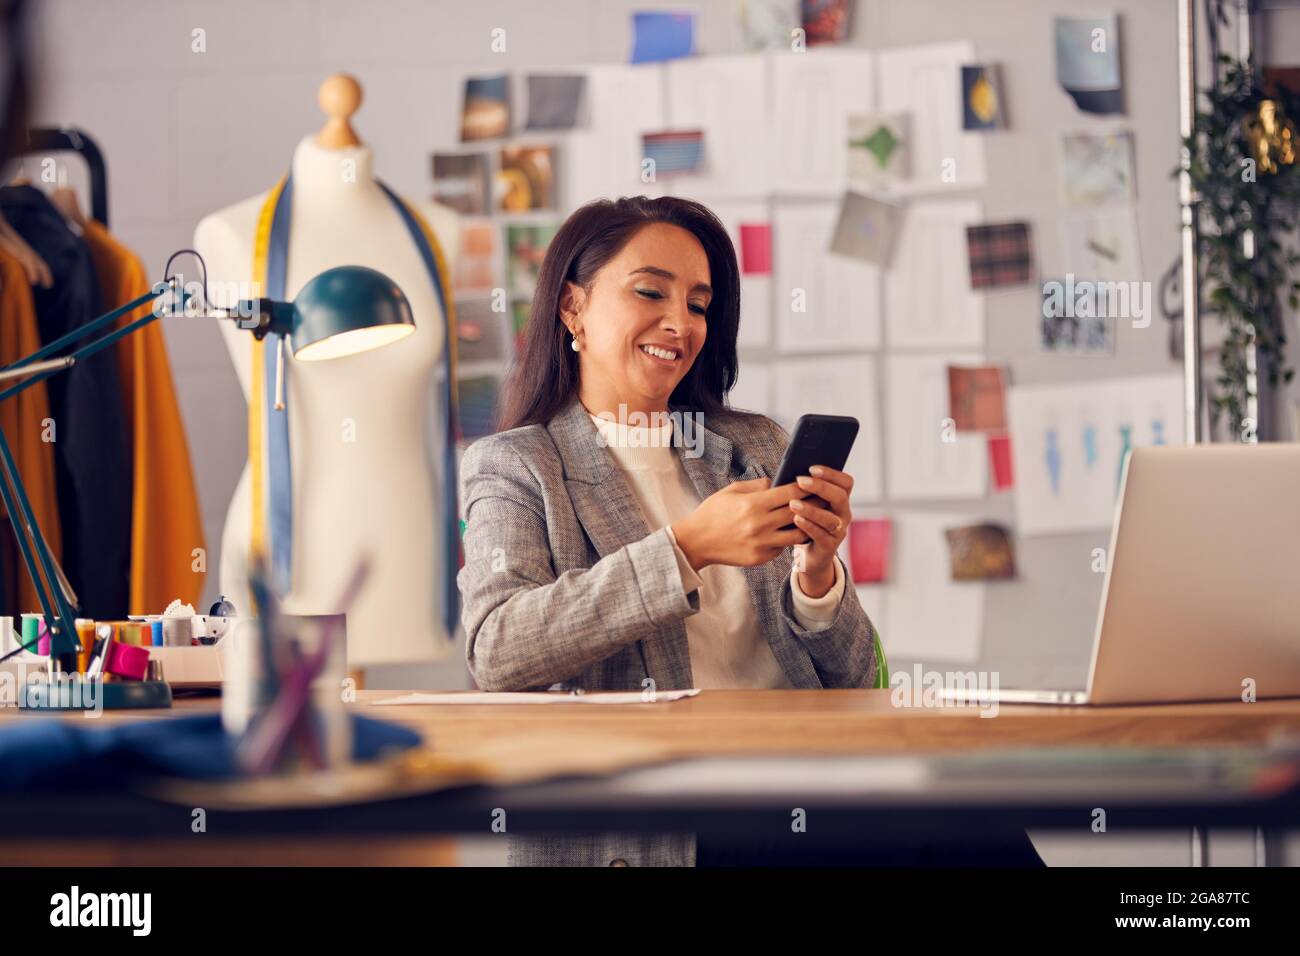 Differential Focus Shot Of Female Fashion Designer Using Mobile Phone To Browse Internet At Desk Stock Photo